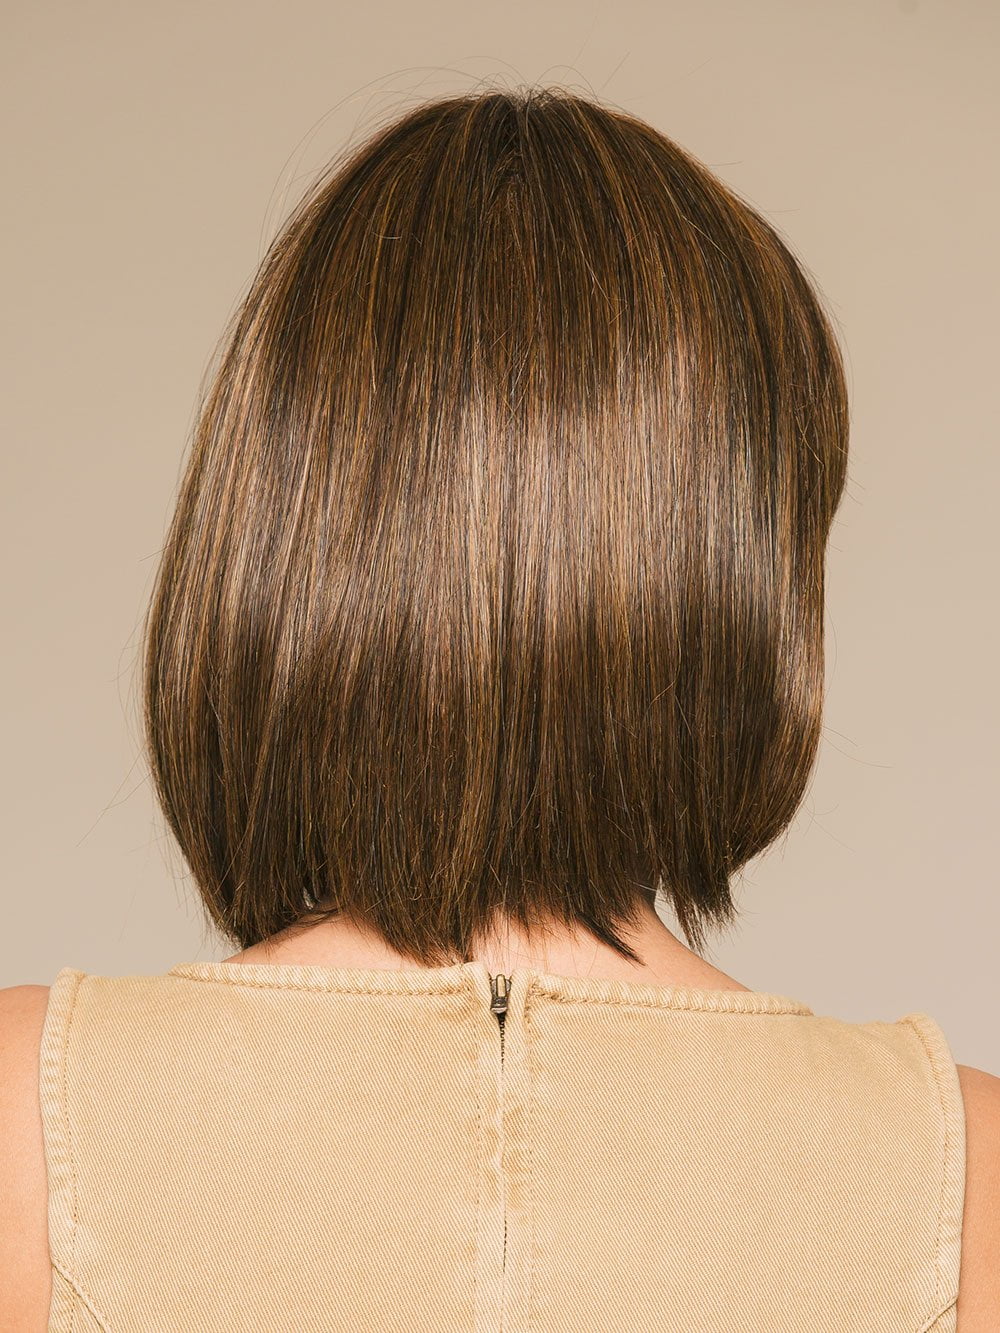 CLASSIC CUT by RAQUEL WELCH in RL5/27 GINGER BROWN | Warm Medium Brown Evenly Blended with Medium Golden Blonde